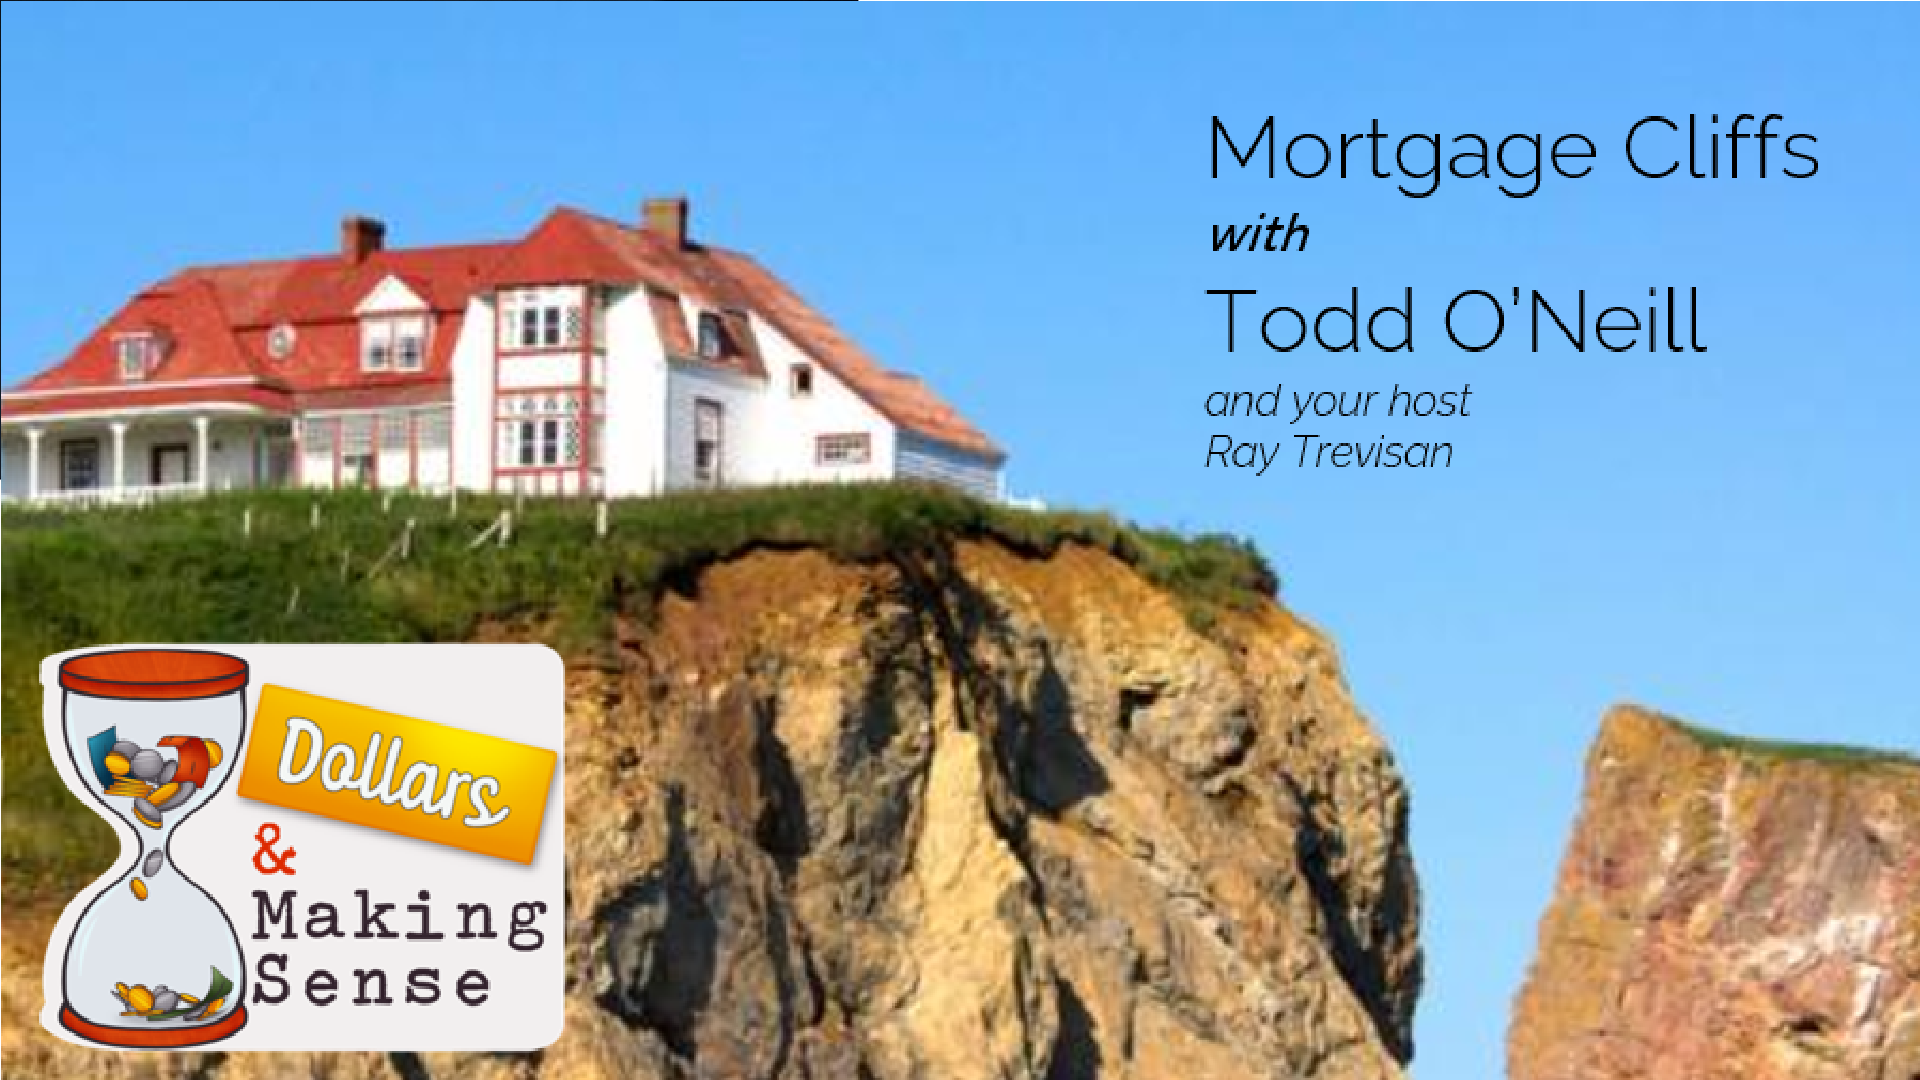 With 23% of all mortgages in the market today being fixed (yes that's correct!), we are facing interesting times when coming to refinance after many years of record low interest rates.  We discuss this dilemma with Todd O'Neill from Xenium Partners what's going on and what to do about it.